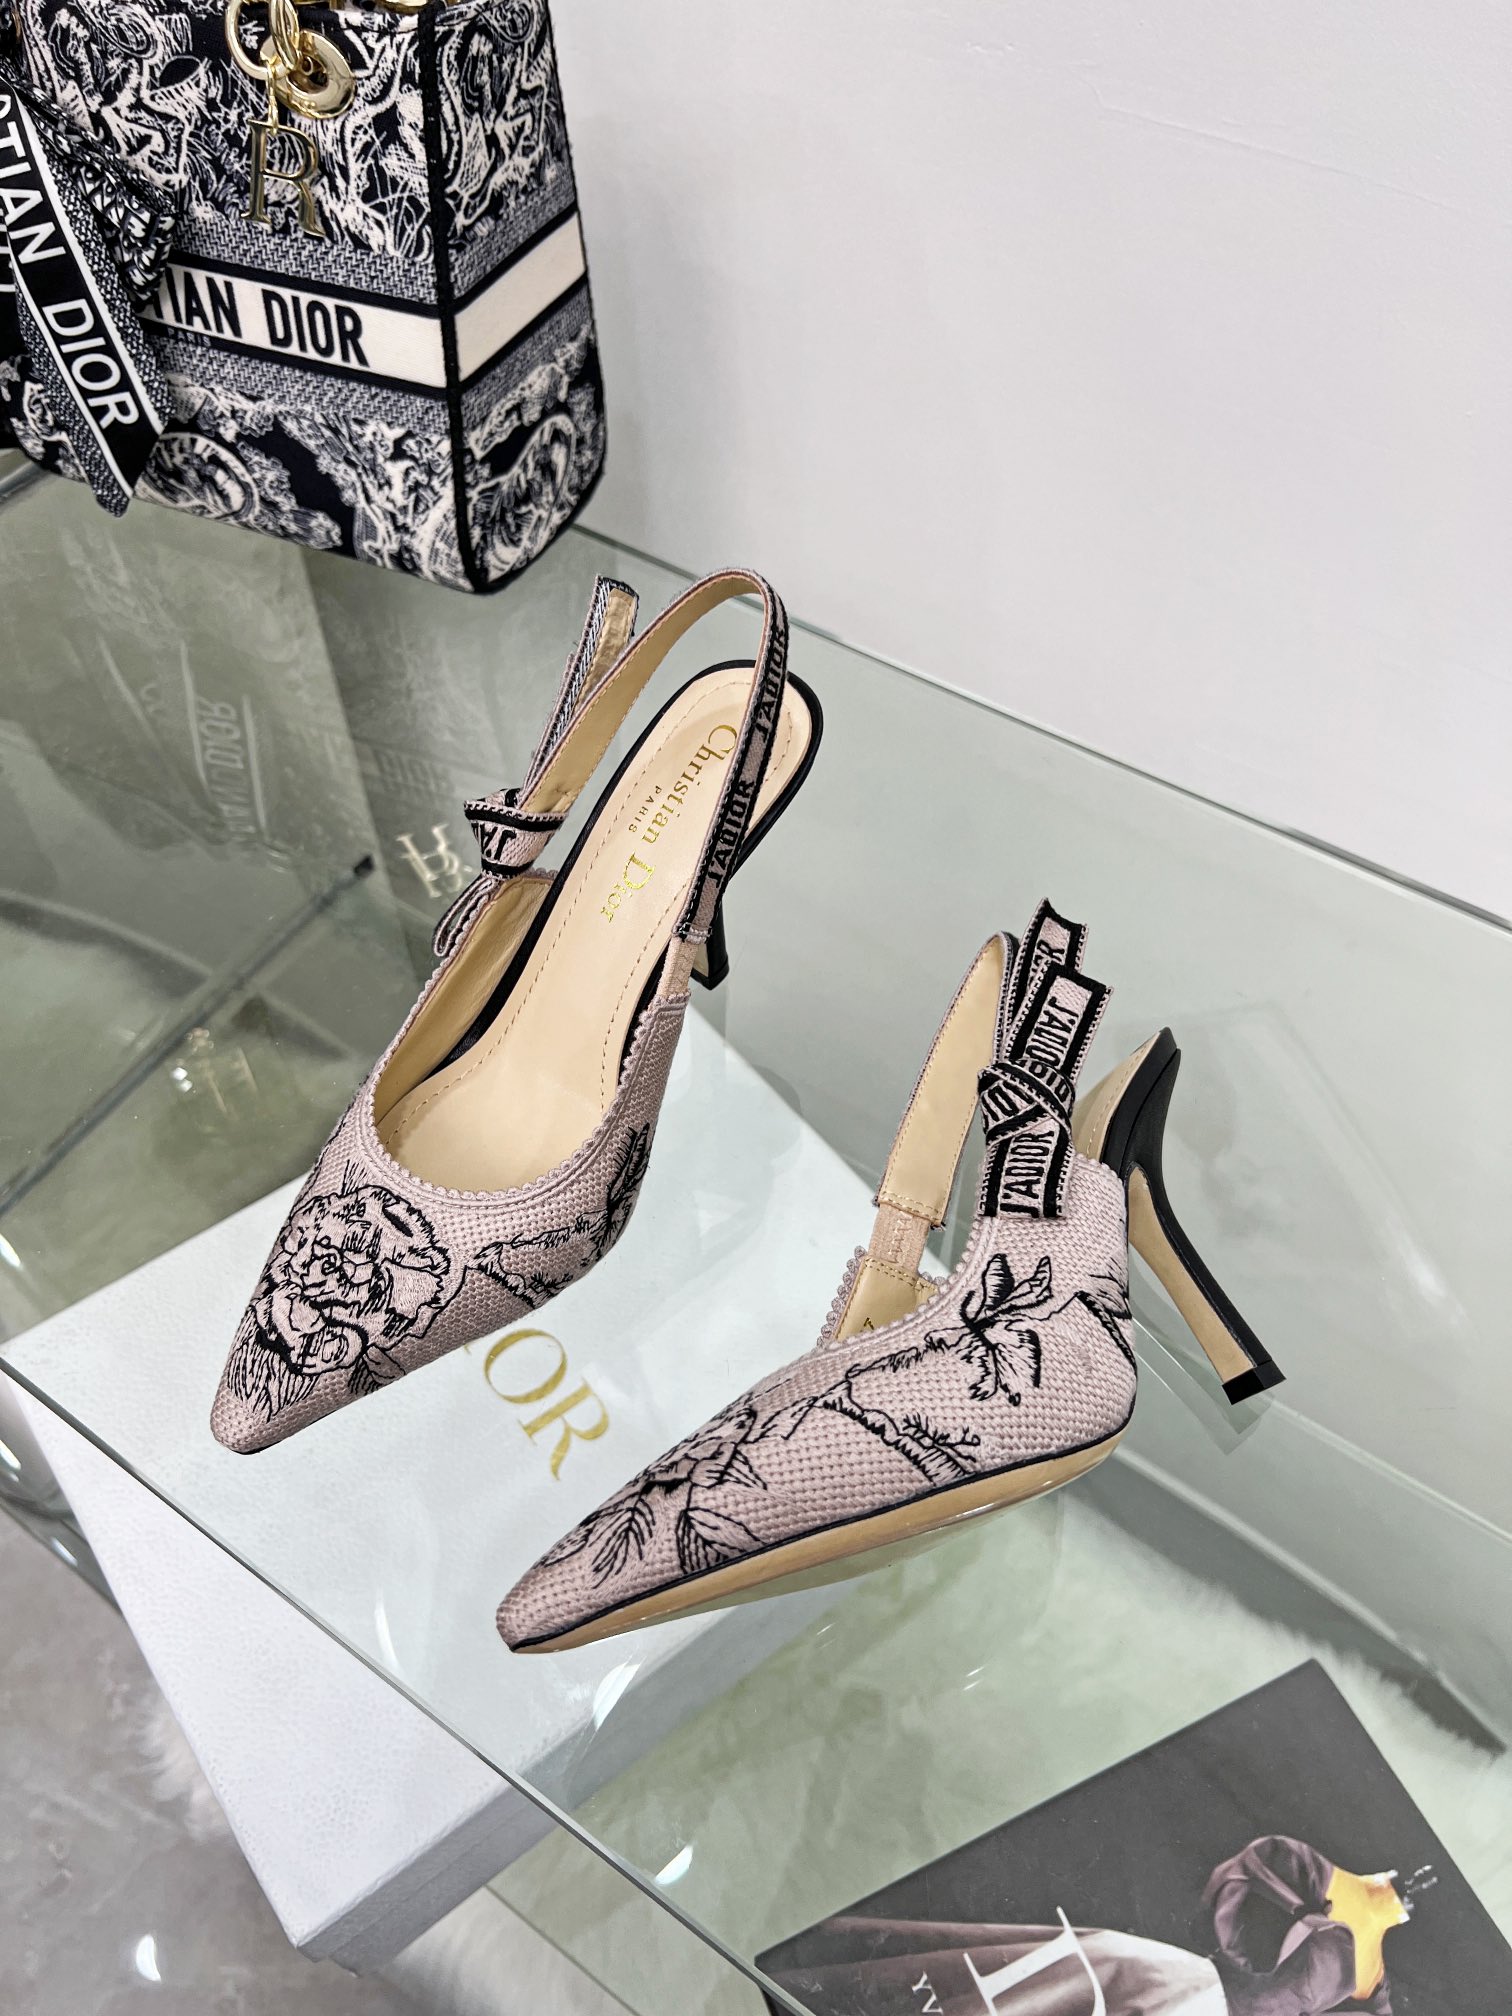 Dior Shoes High Heel Pumps Sandals Embroidery Genuine Leather Sheepskin Spring/Summer Collection